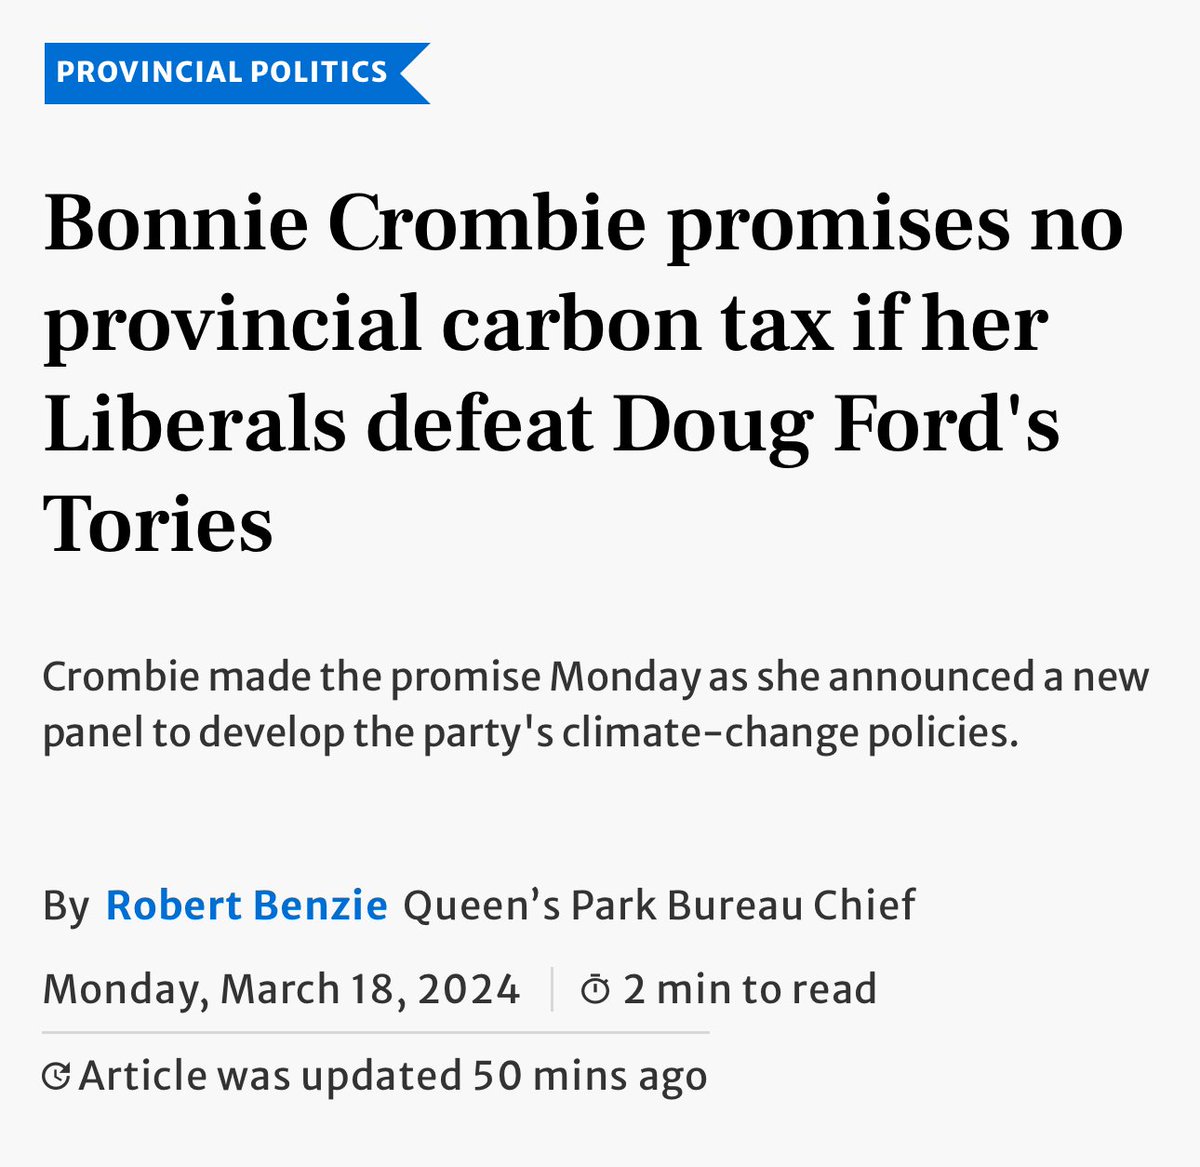 Another provincial Liberal party distances itself from Trudeau’s April Fool’s Day 23% carbon tax hike. Sign here to tell Trudeau/Singh to spike their hike until common sense Conservatives can axe the tax: spikethehike.ca